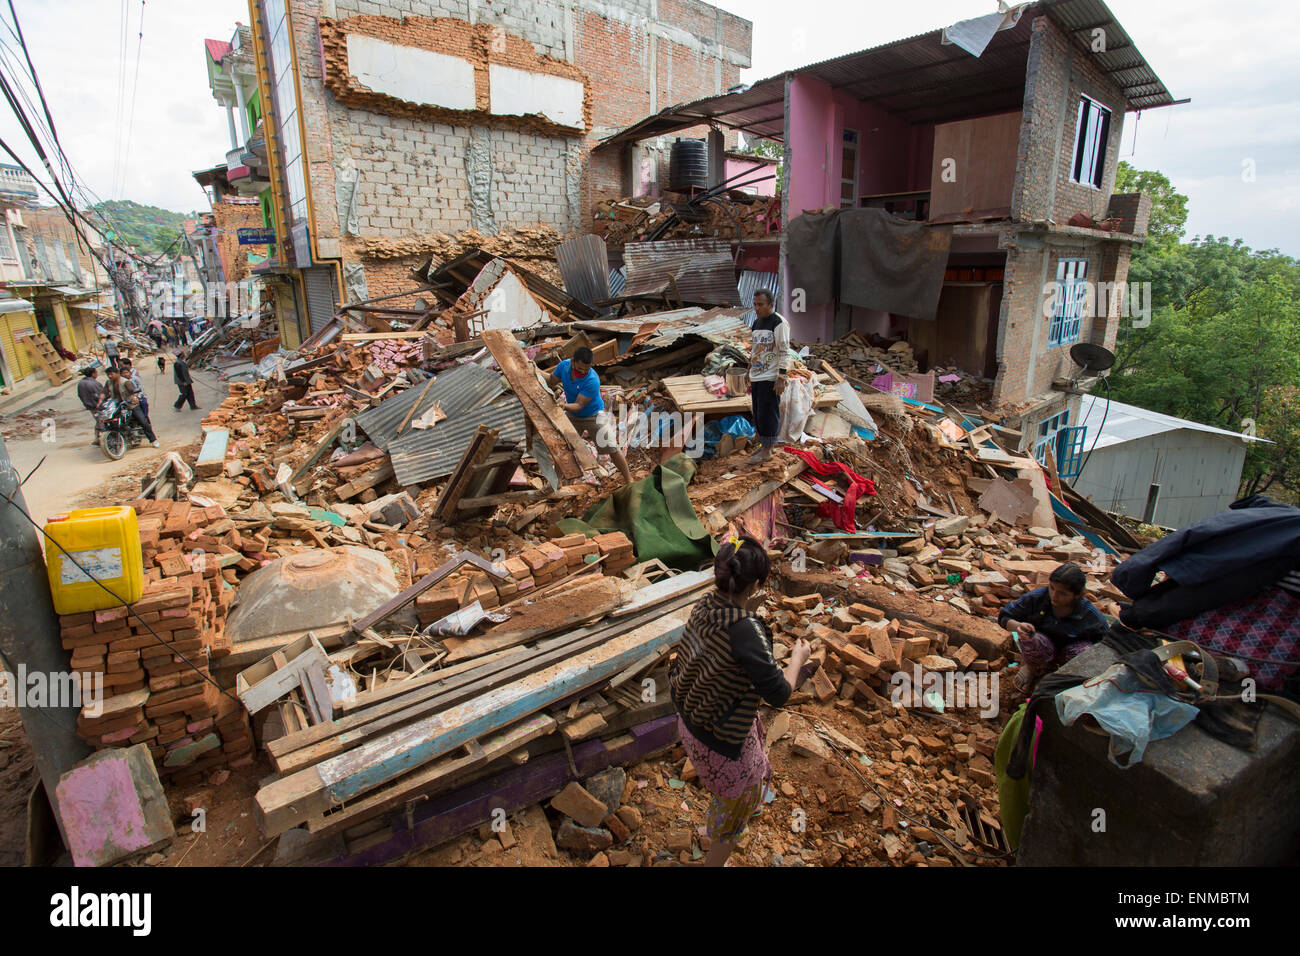 Residents of Chautara town dig through the rubble of their homes in Sindhulpalchowk District, Nepal following the 2015 earthquake. Stock Photo